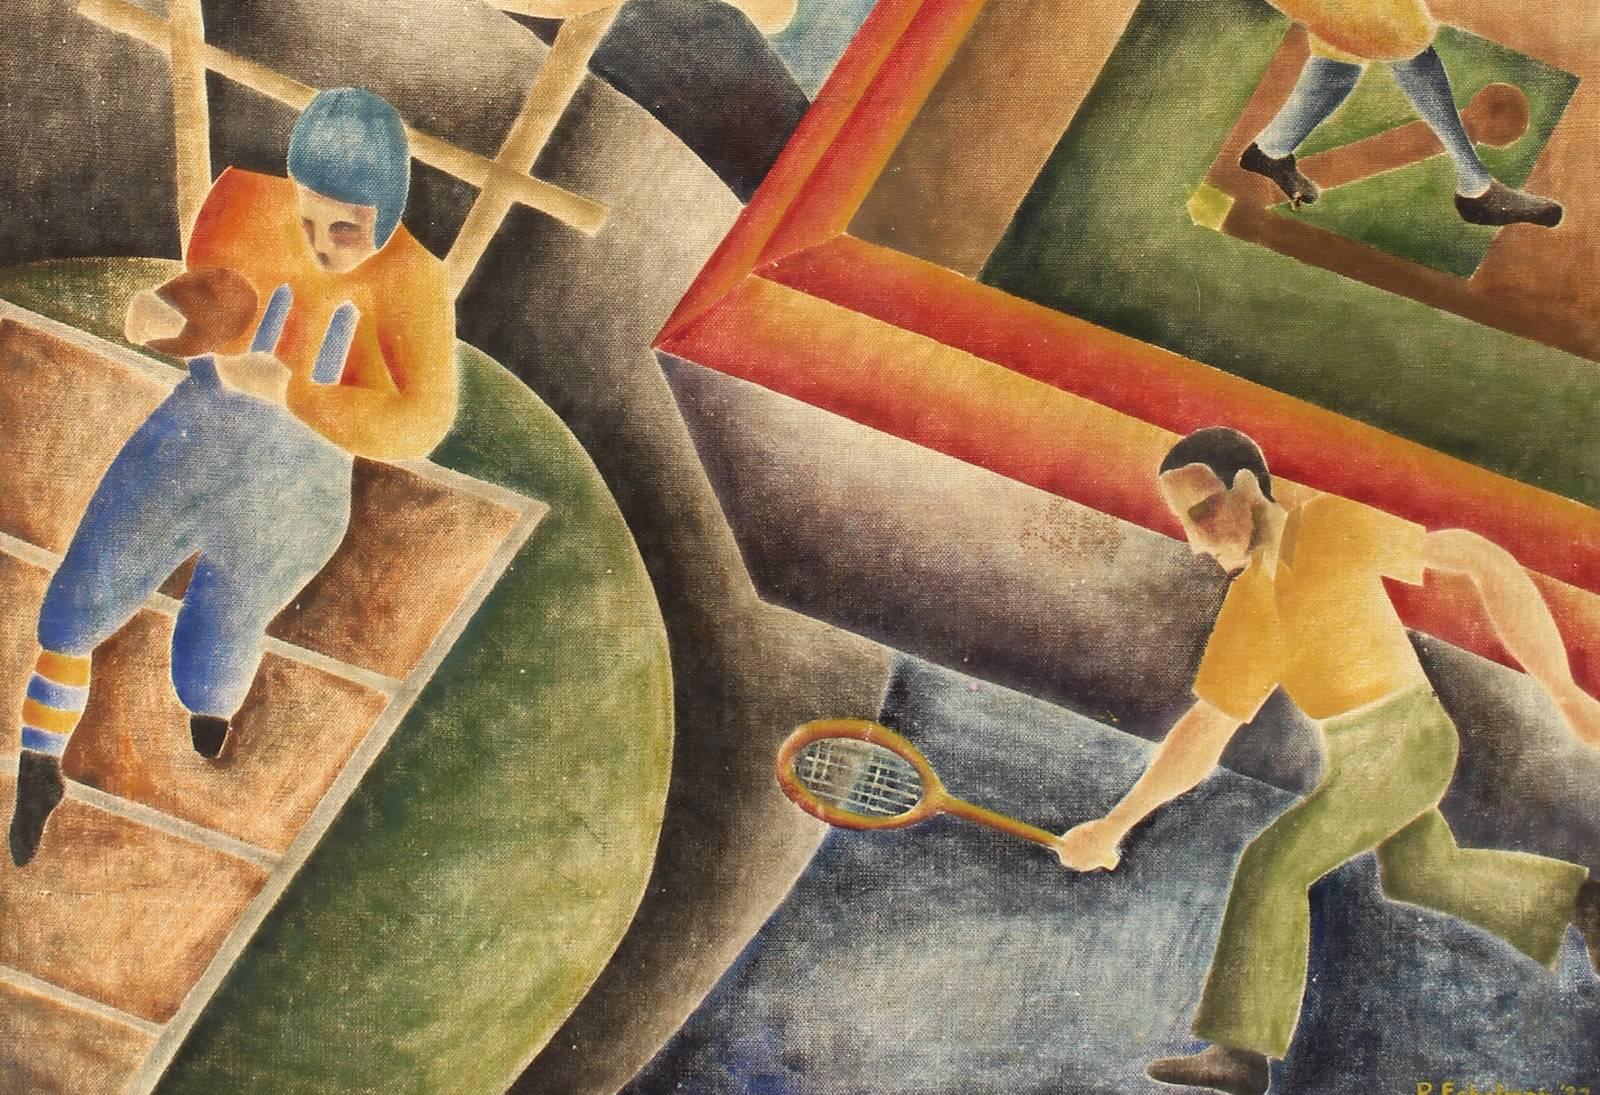 WPA oil painting depicting various sports.  This is most likely a mural study and somewhere in New York State this mural was created in the 30's.